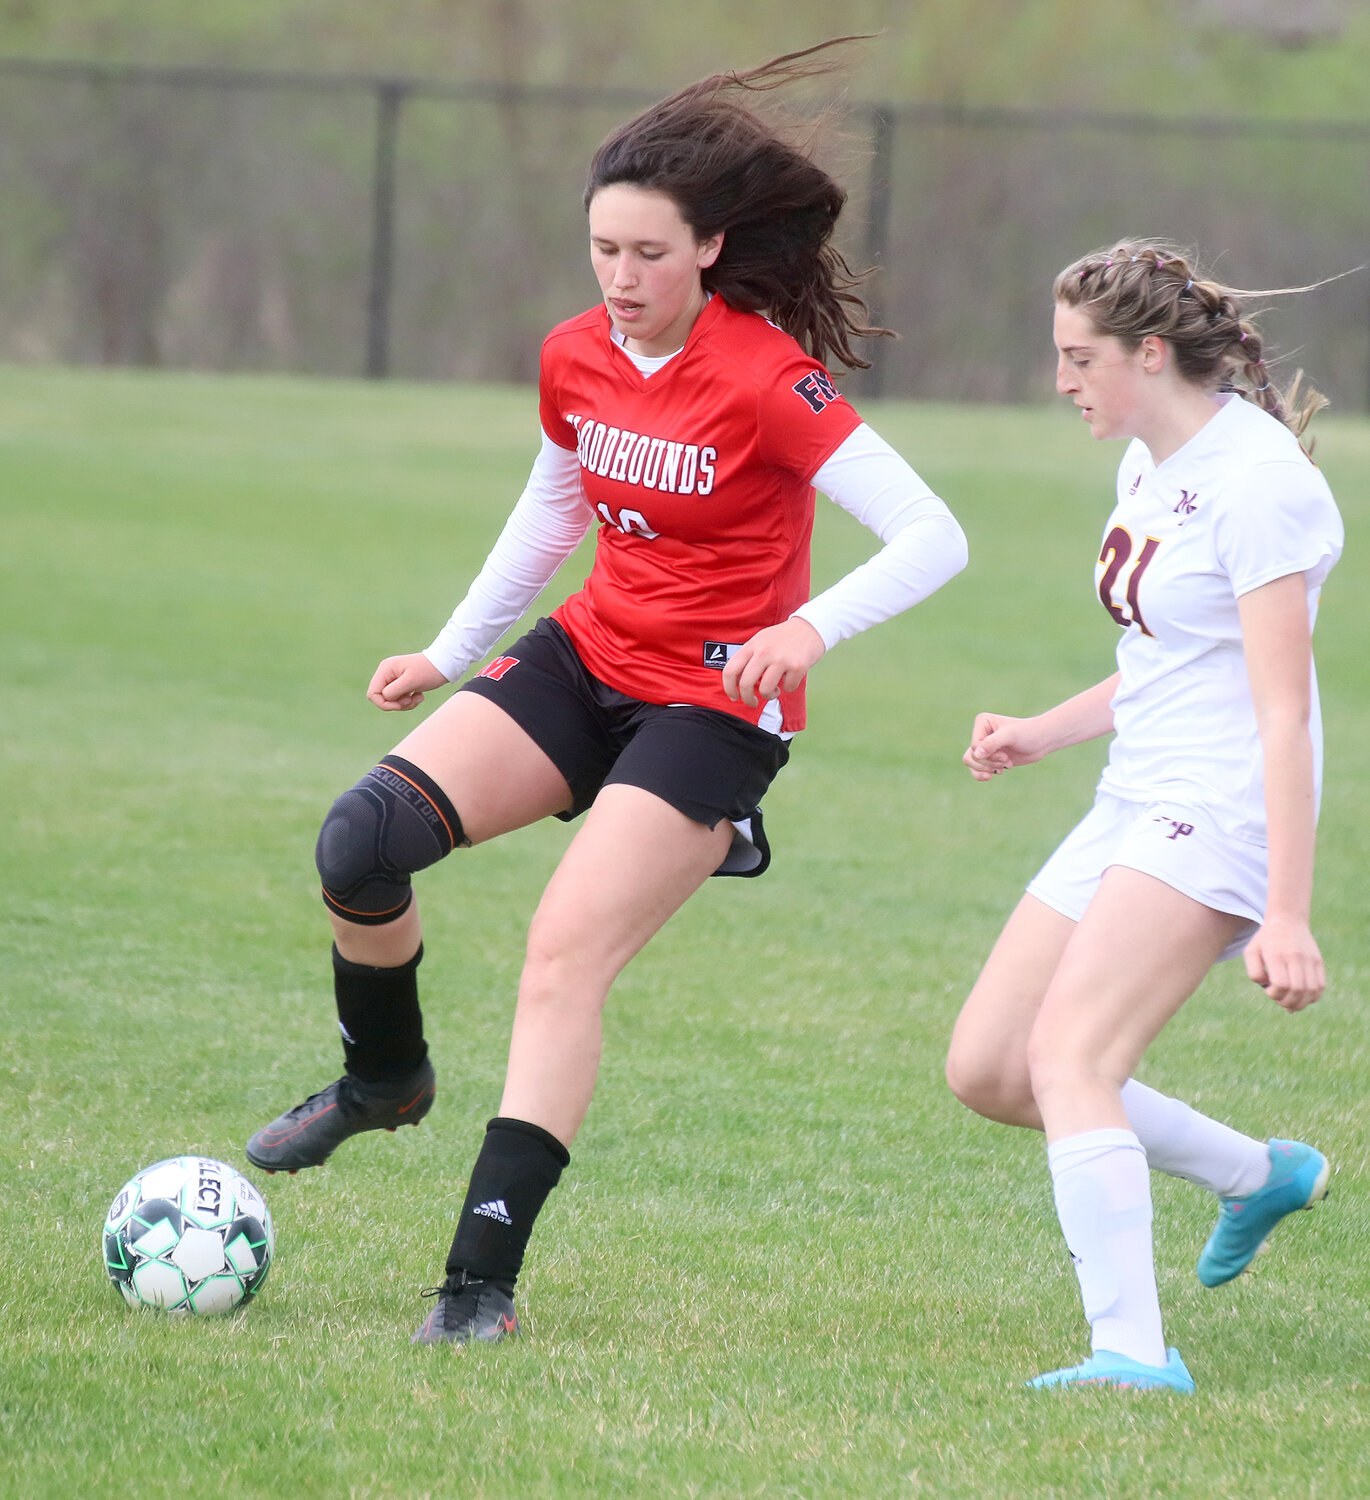 Hound freshman Halle Menke brings the ball through the midfield in the first half Thursday night.